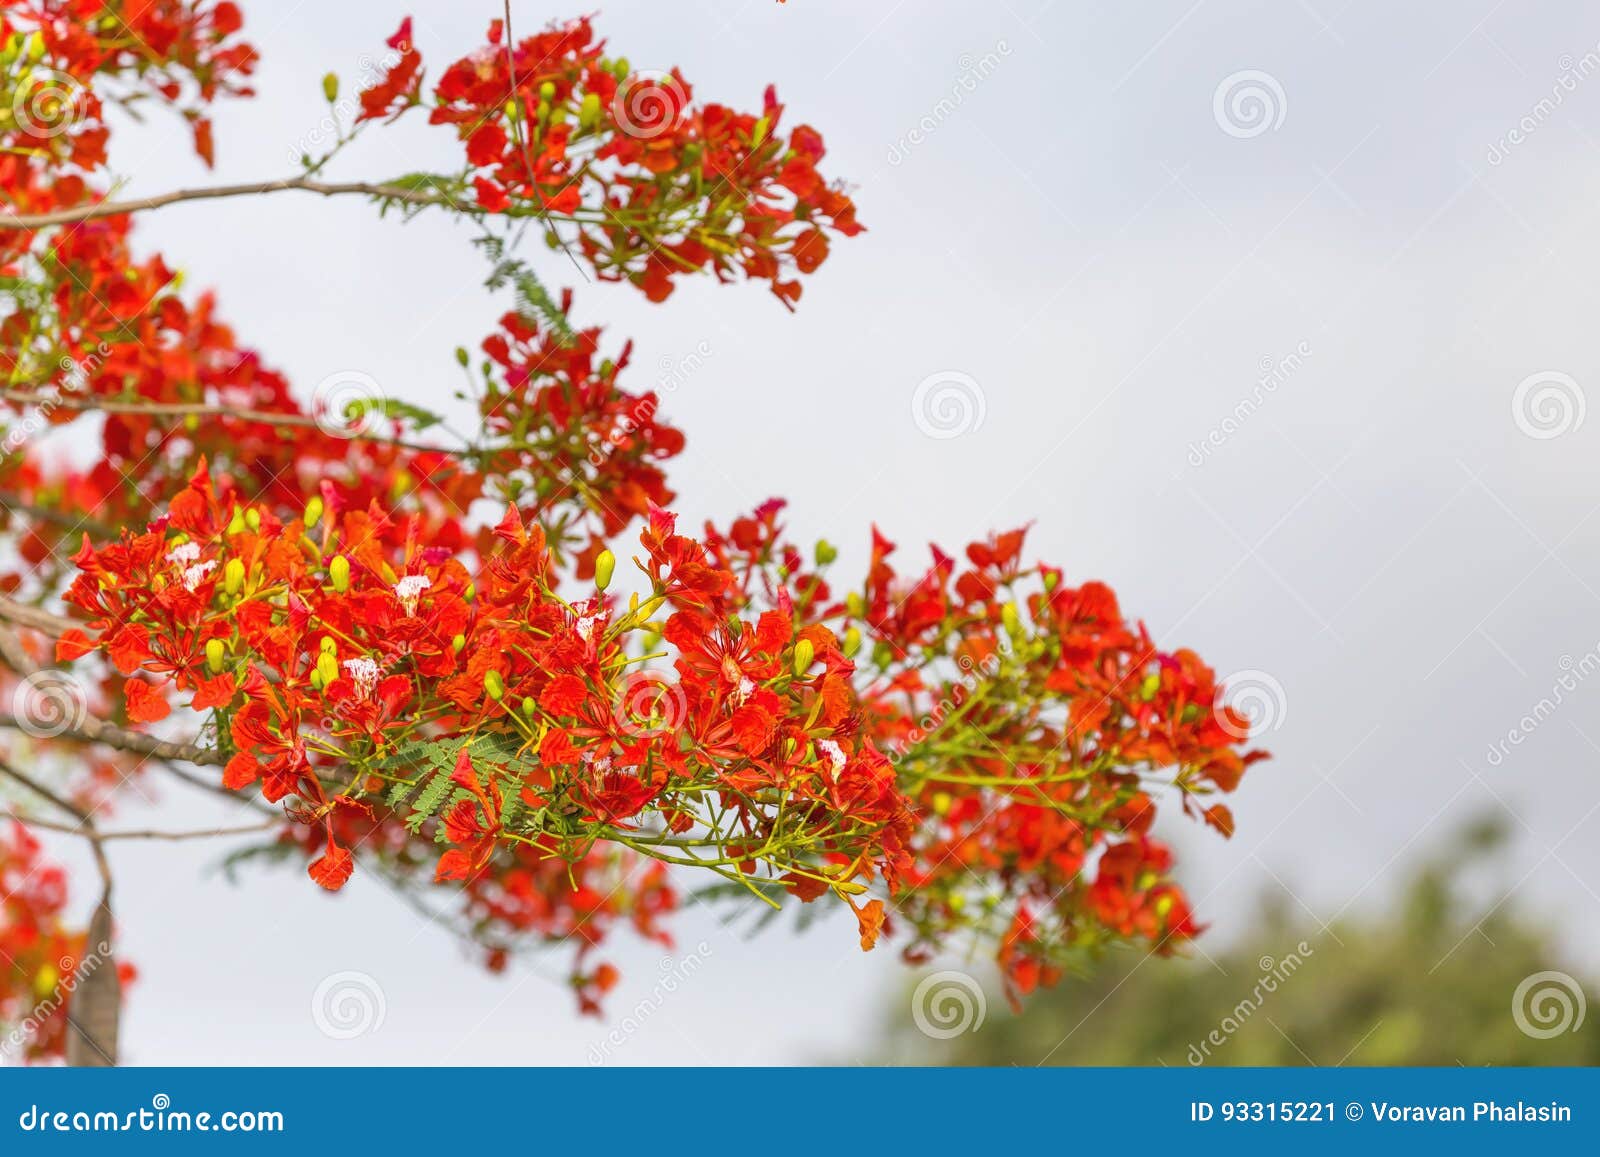 Red Peacock Flower Tree, on Blur Background. Stock Image - Image of sunny,  botany: 93315221